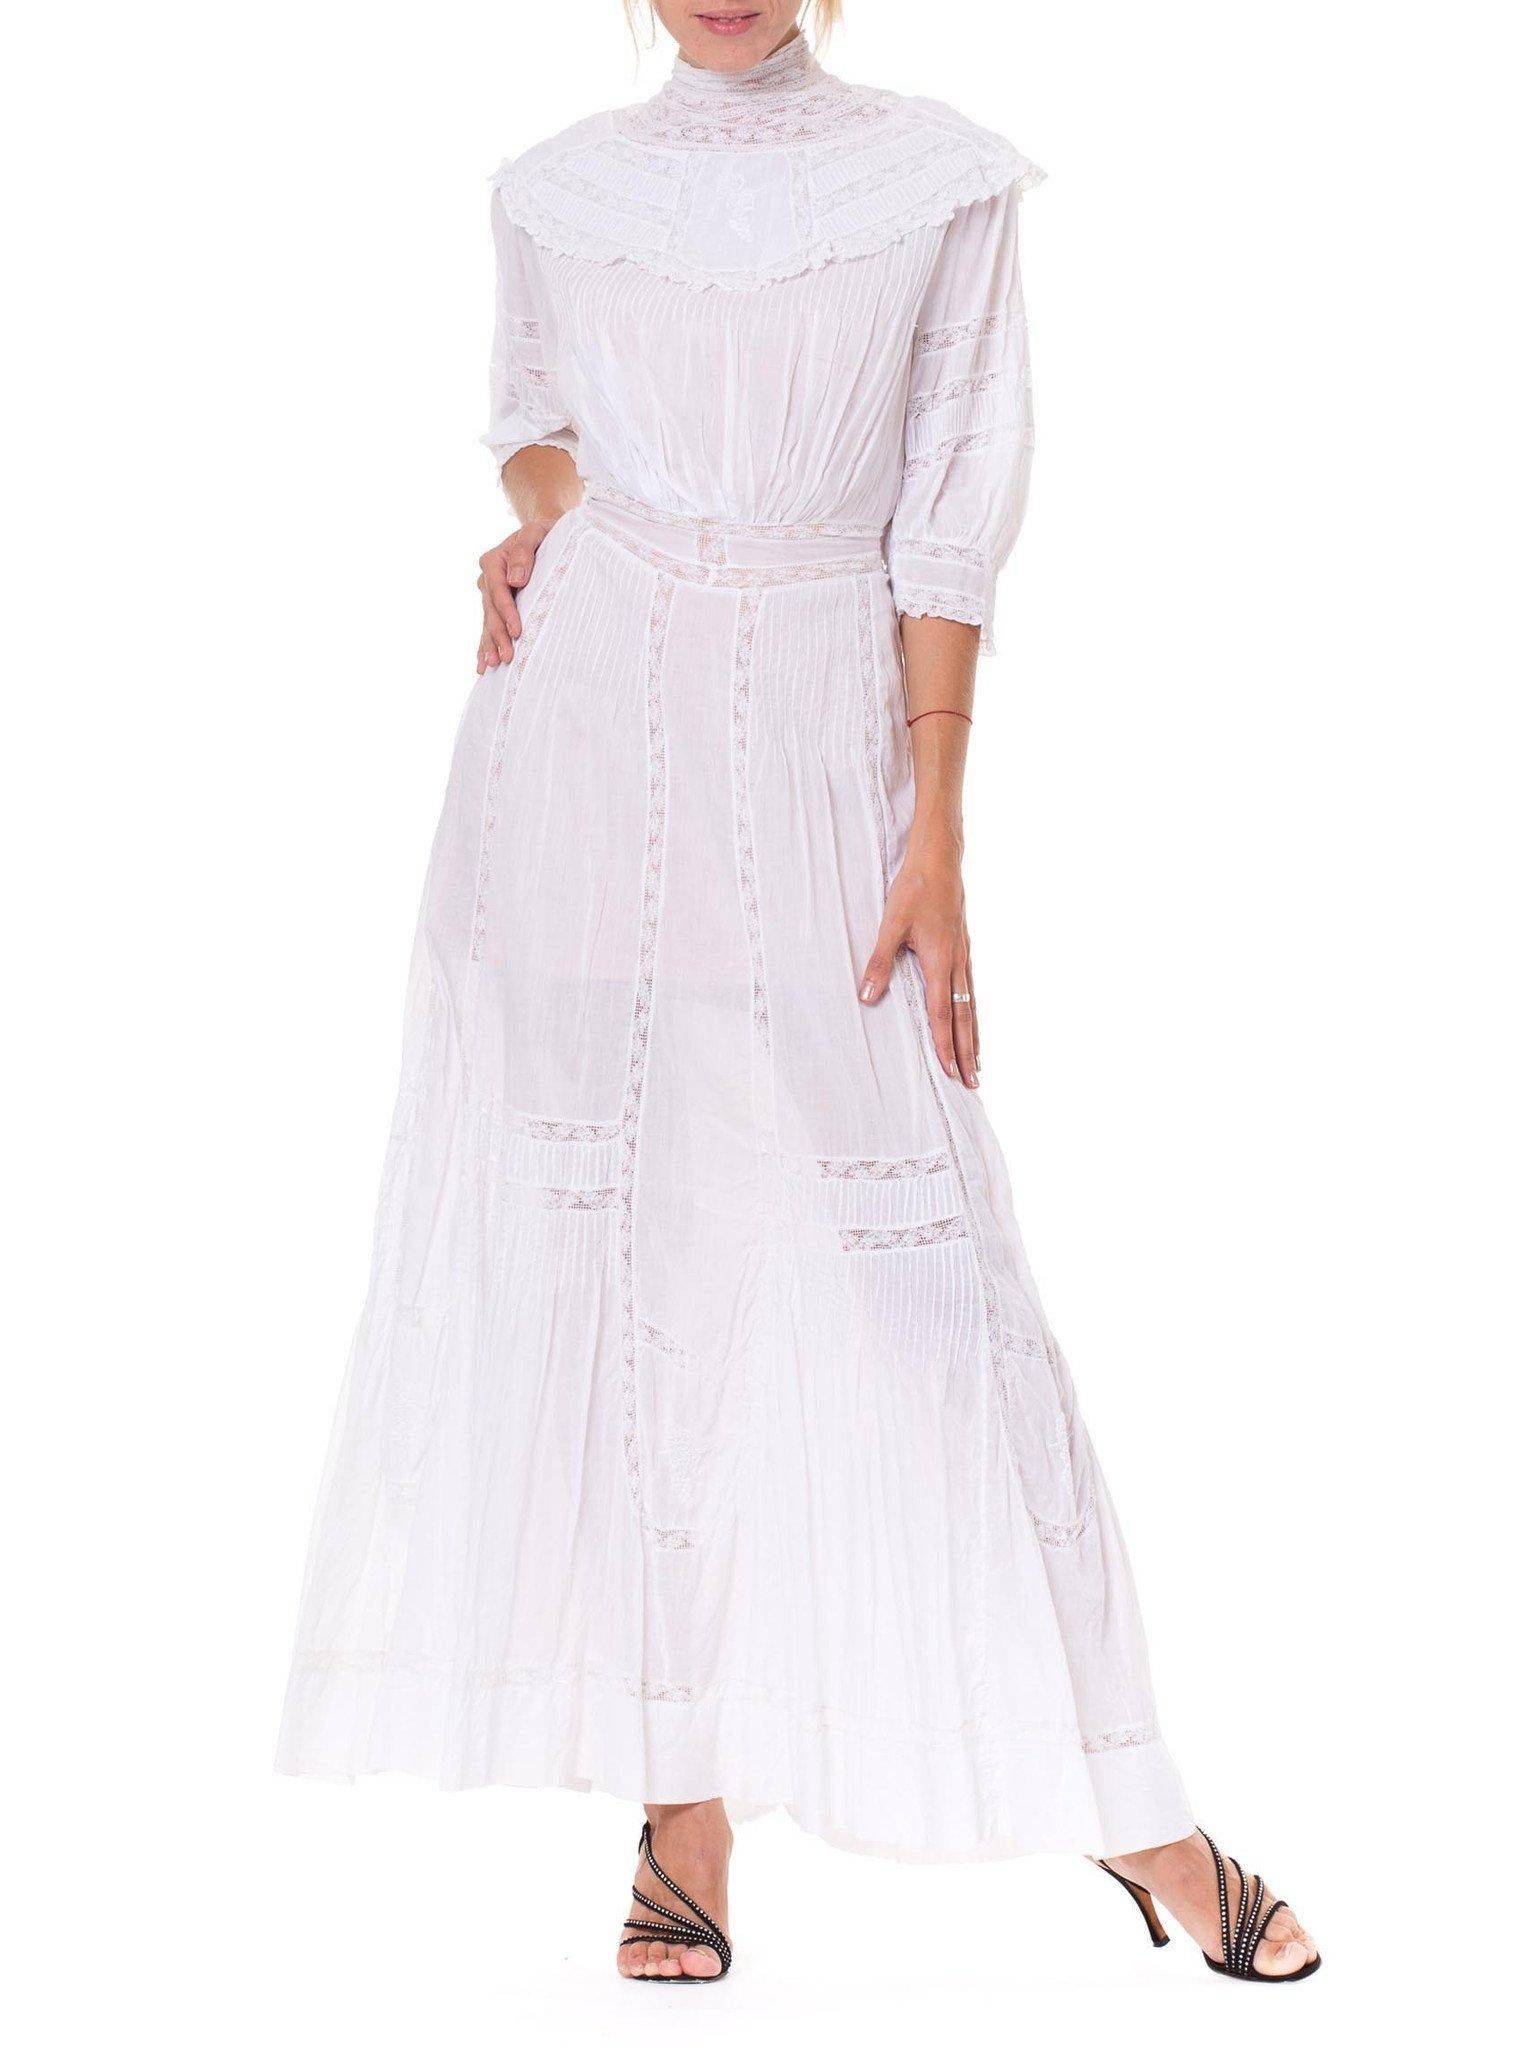 Women's Victorian White Cotton Voile Lace Tea Dress With Half Sleeves